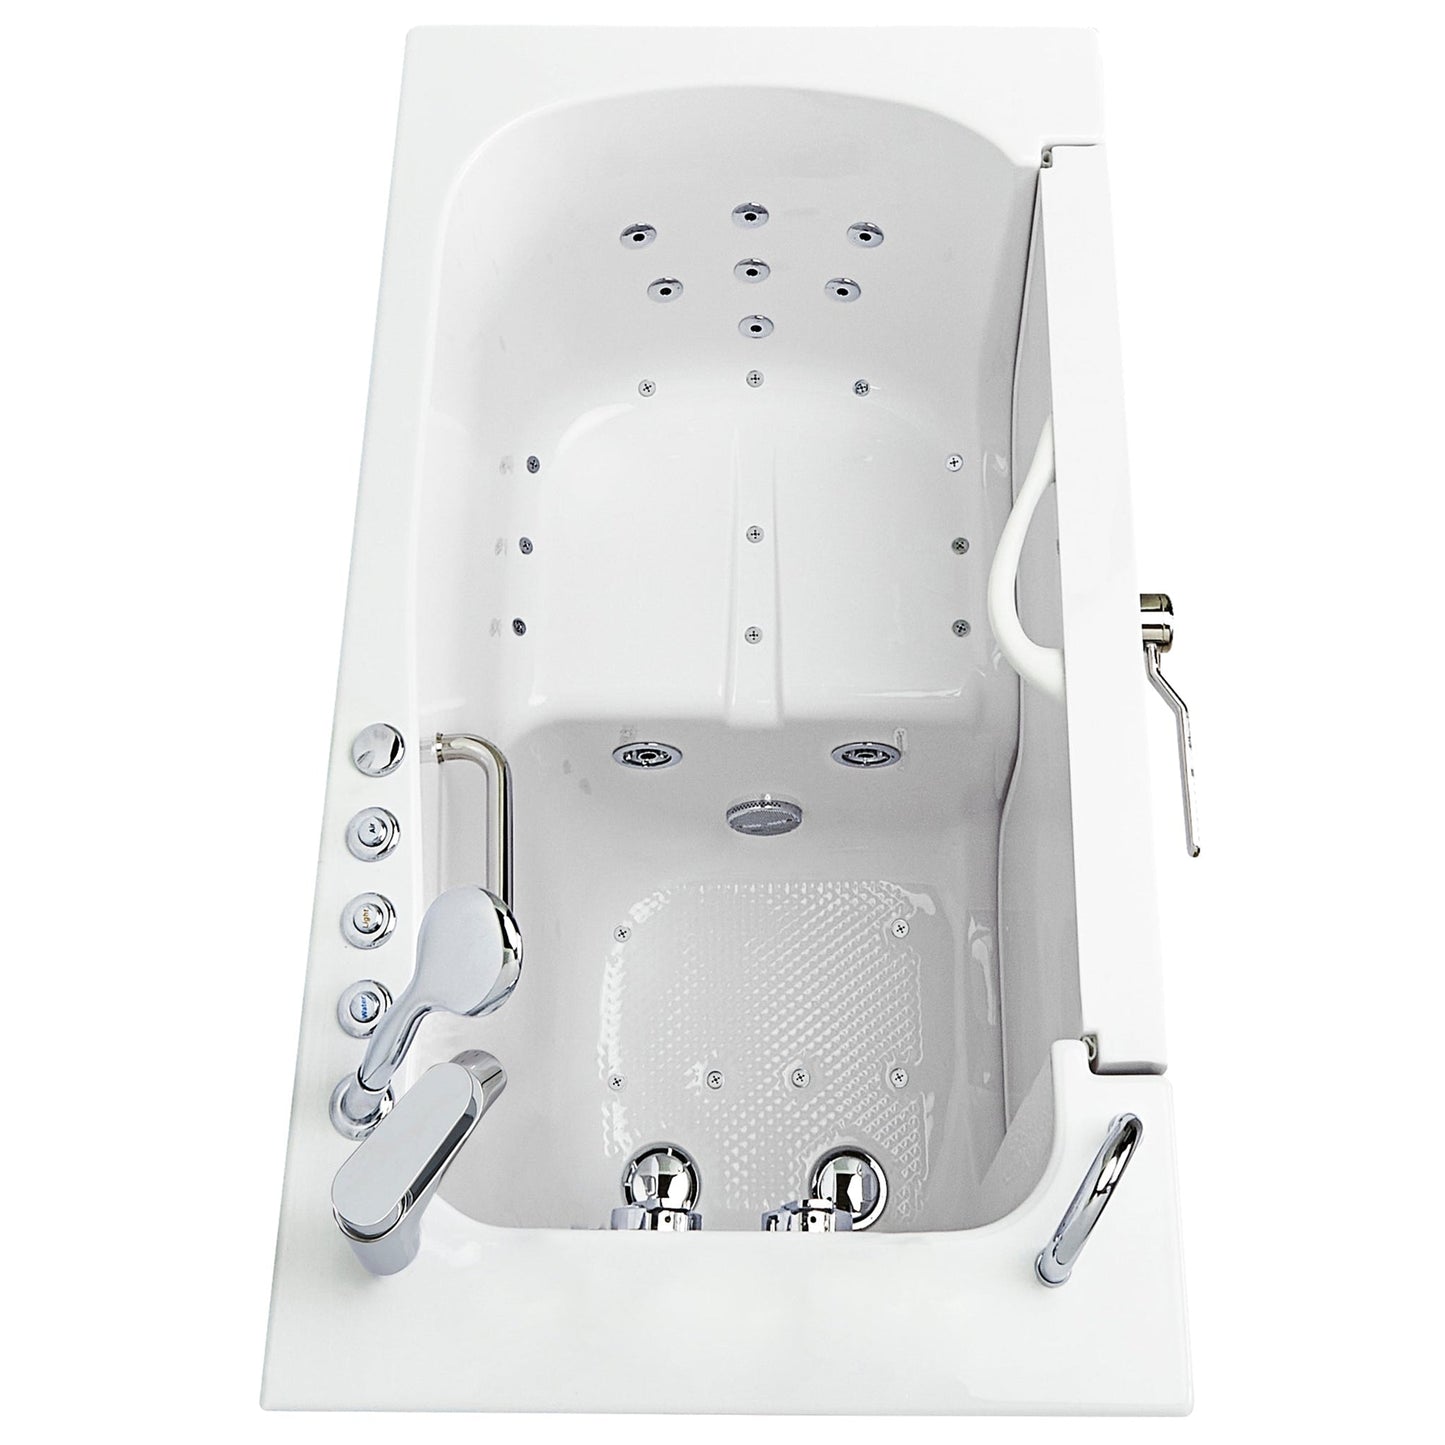 Ella's Bubbles Transfer 26" x 52" White Acrylic Air and Hydro Massage Walk-In Bathtub With 2-Piece Fast Fill Faucet, 2" Dual Drain and Left L-Shape Outswing Door